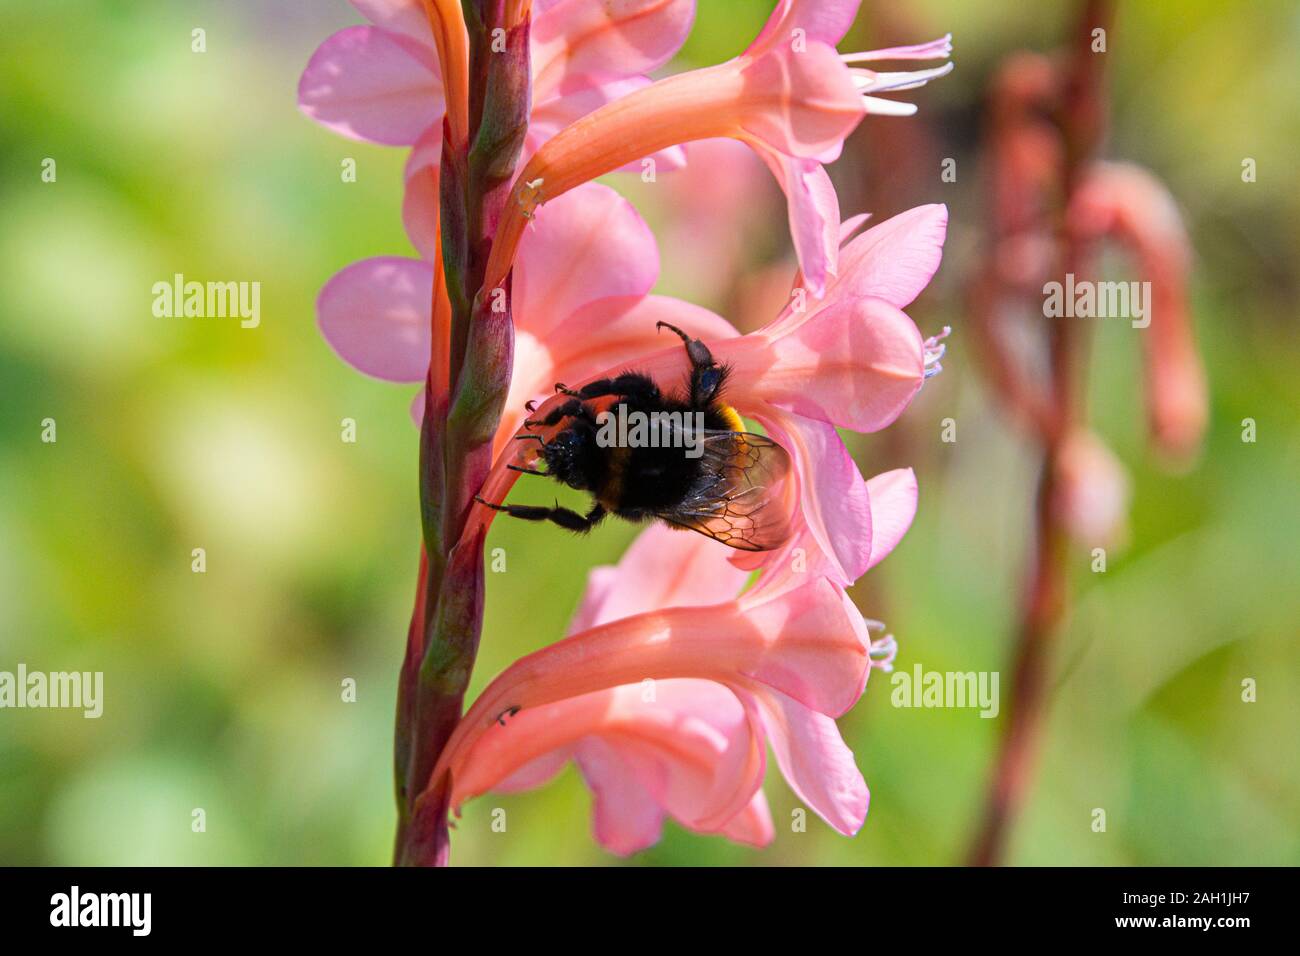 A bumble bee on the flower spike of a bugle lily (Watsonia) Stock Photo